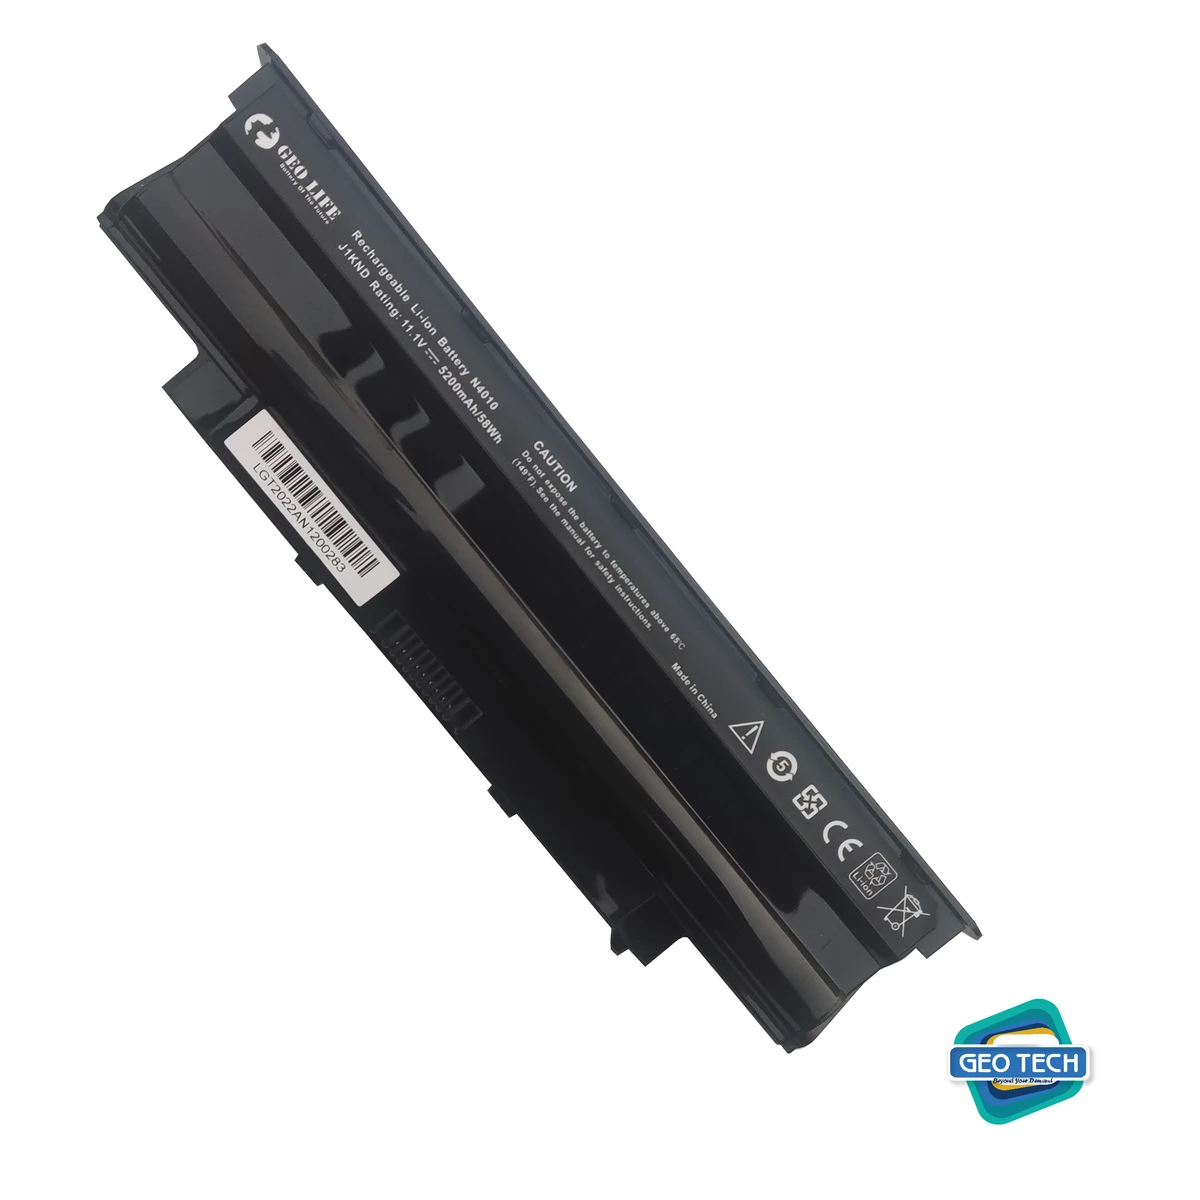 Battery 58 WH Replacement for J1KND 4T7JN WT2P4 383CW 312-1205 312-0233 312-0234 312-1280 Compatible for Dell Inspiron 3420 3520 13R (N3010) 14R (N4010 N4110) (N5010 N5110) N7010